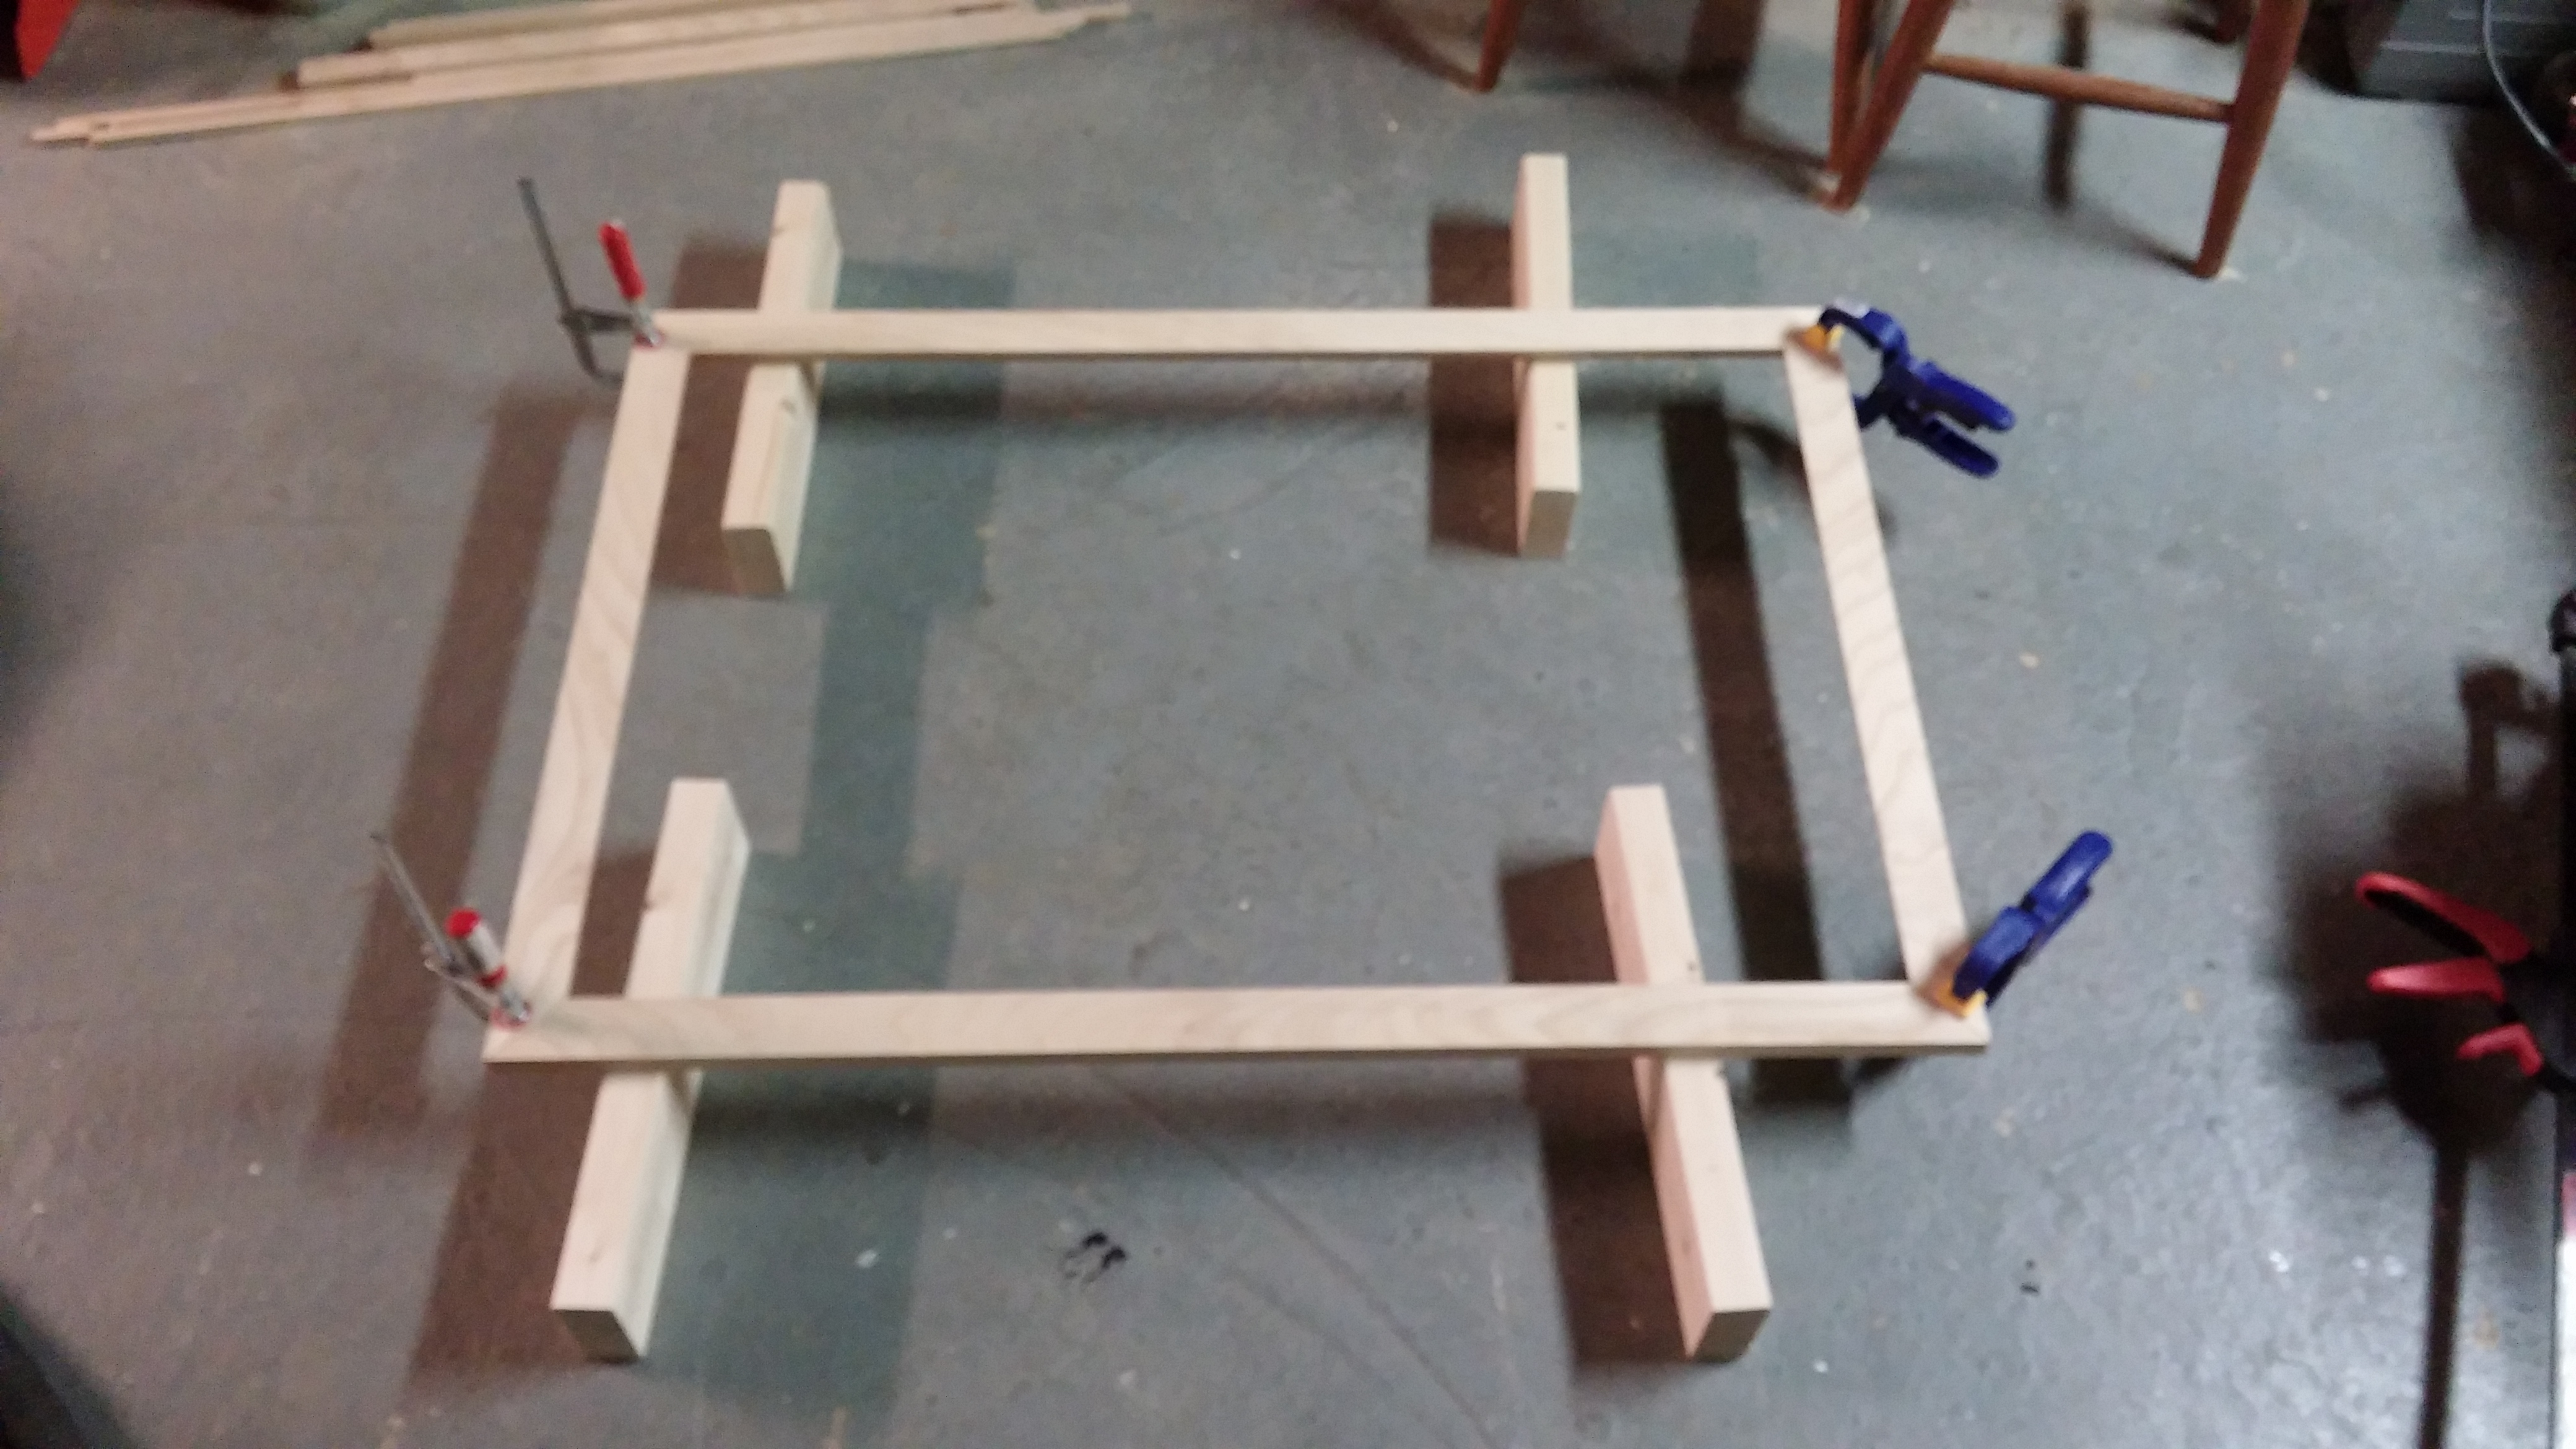 Gluing everything together.  The mitered half-laps did a good job of keeping everything square